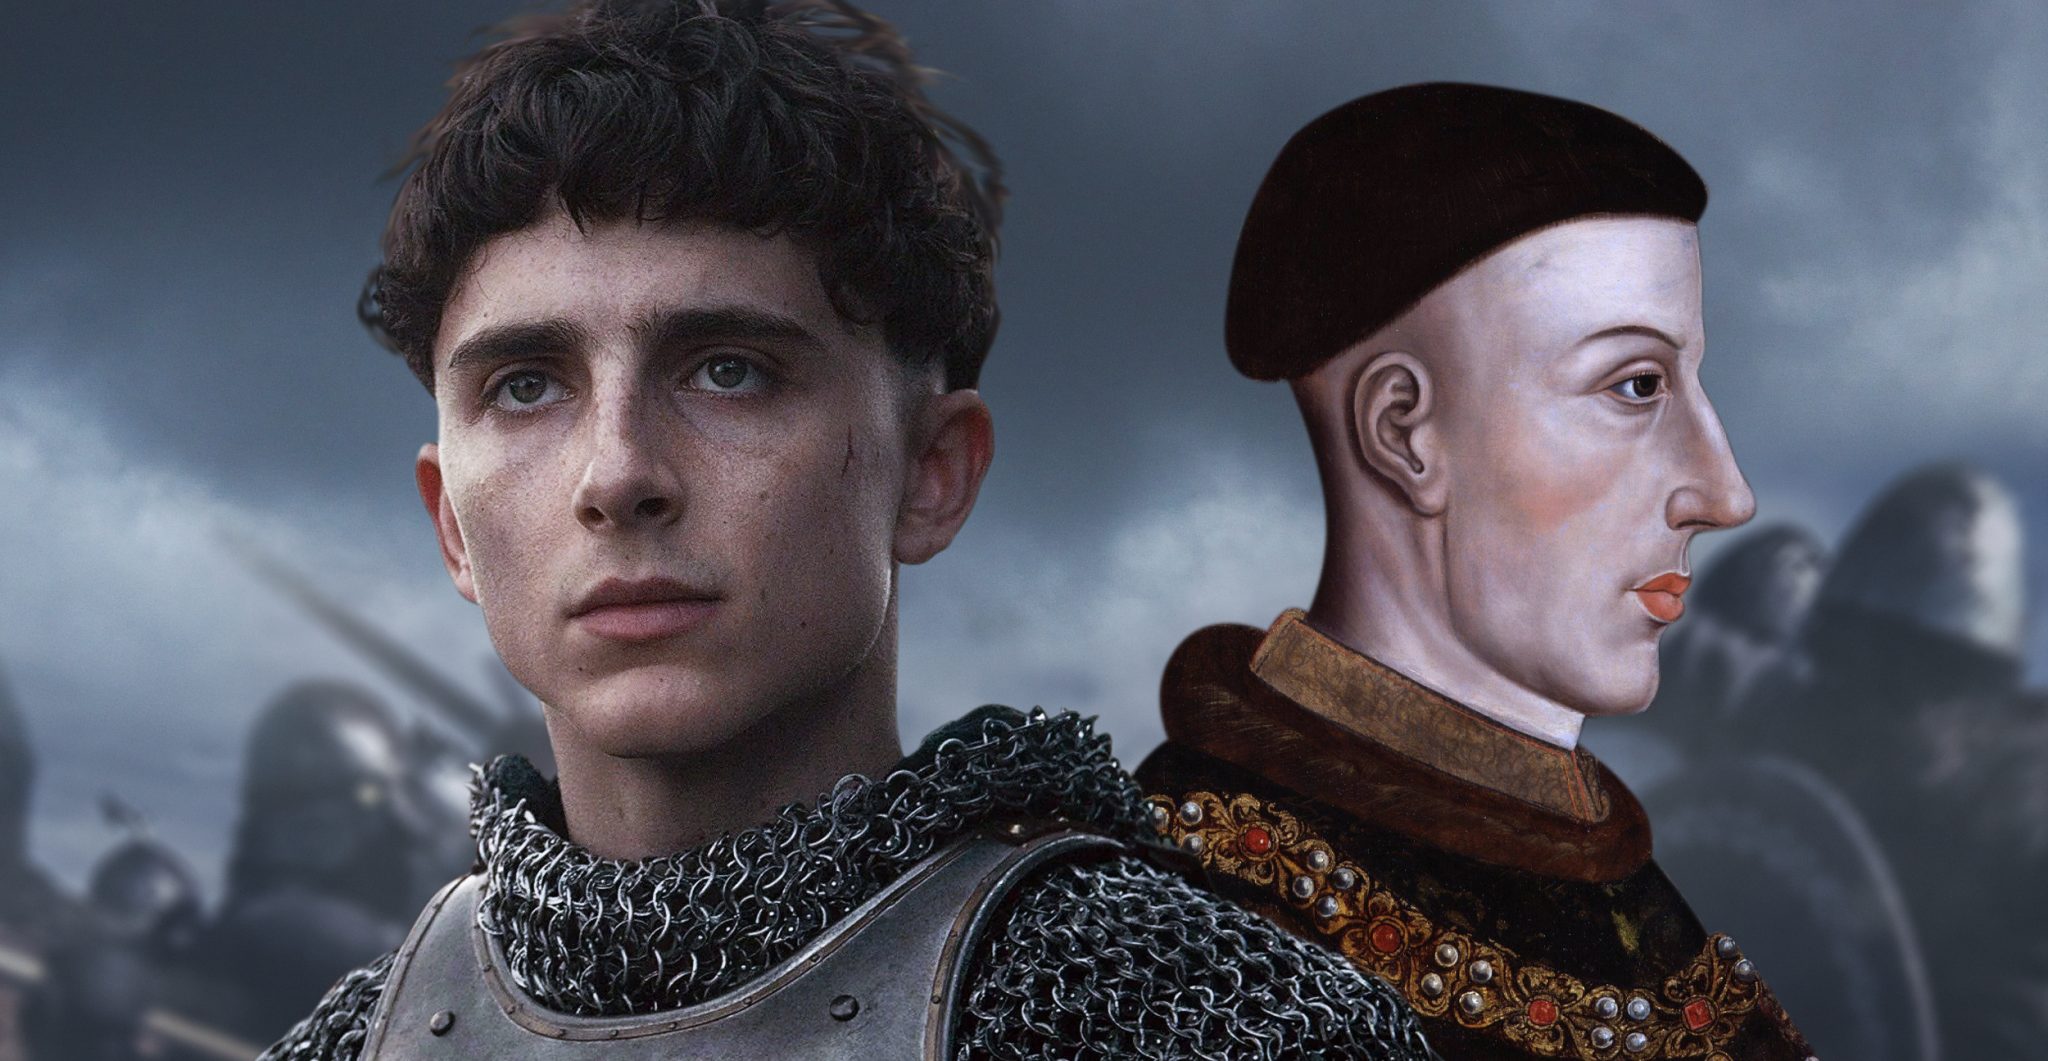 Timothee Chalamet as Henry V in the Netflix series (left) and actual portrait of Henry V (right)